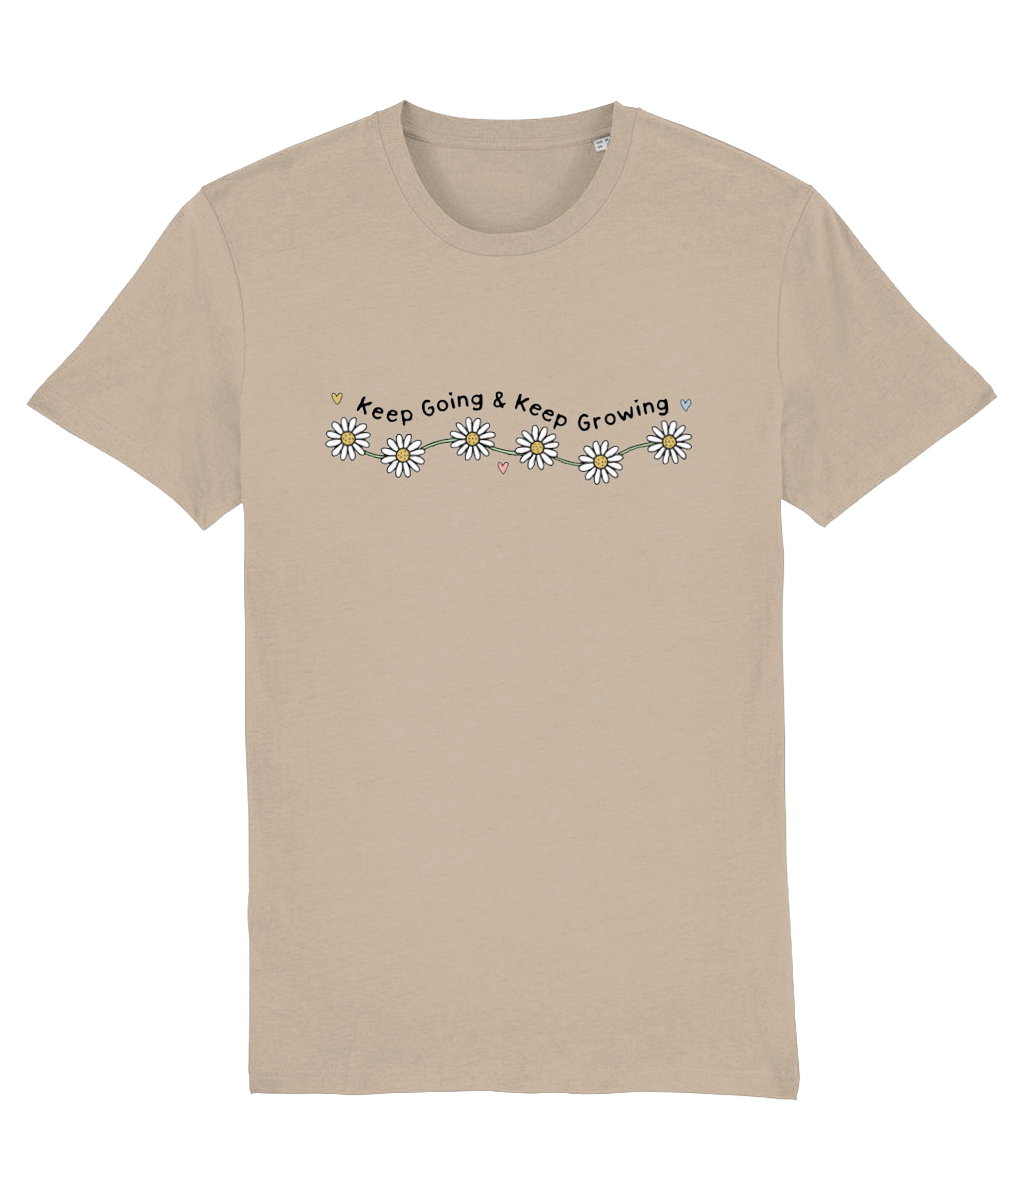 Keep Going & Keep Growing - Adult T-Shirt - Light Multi Colour Available